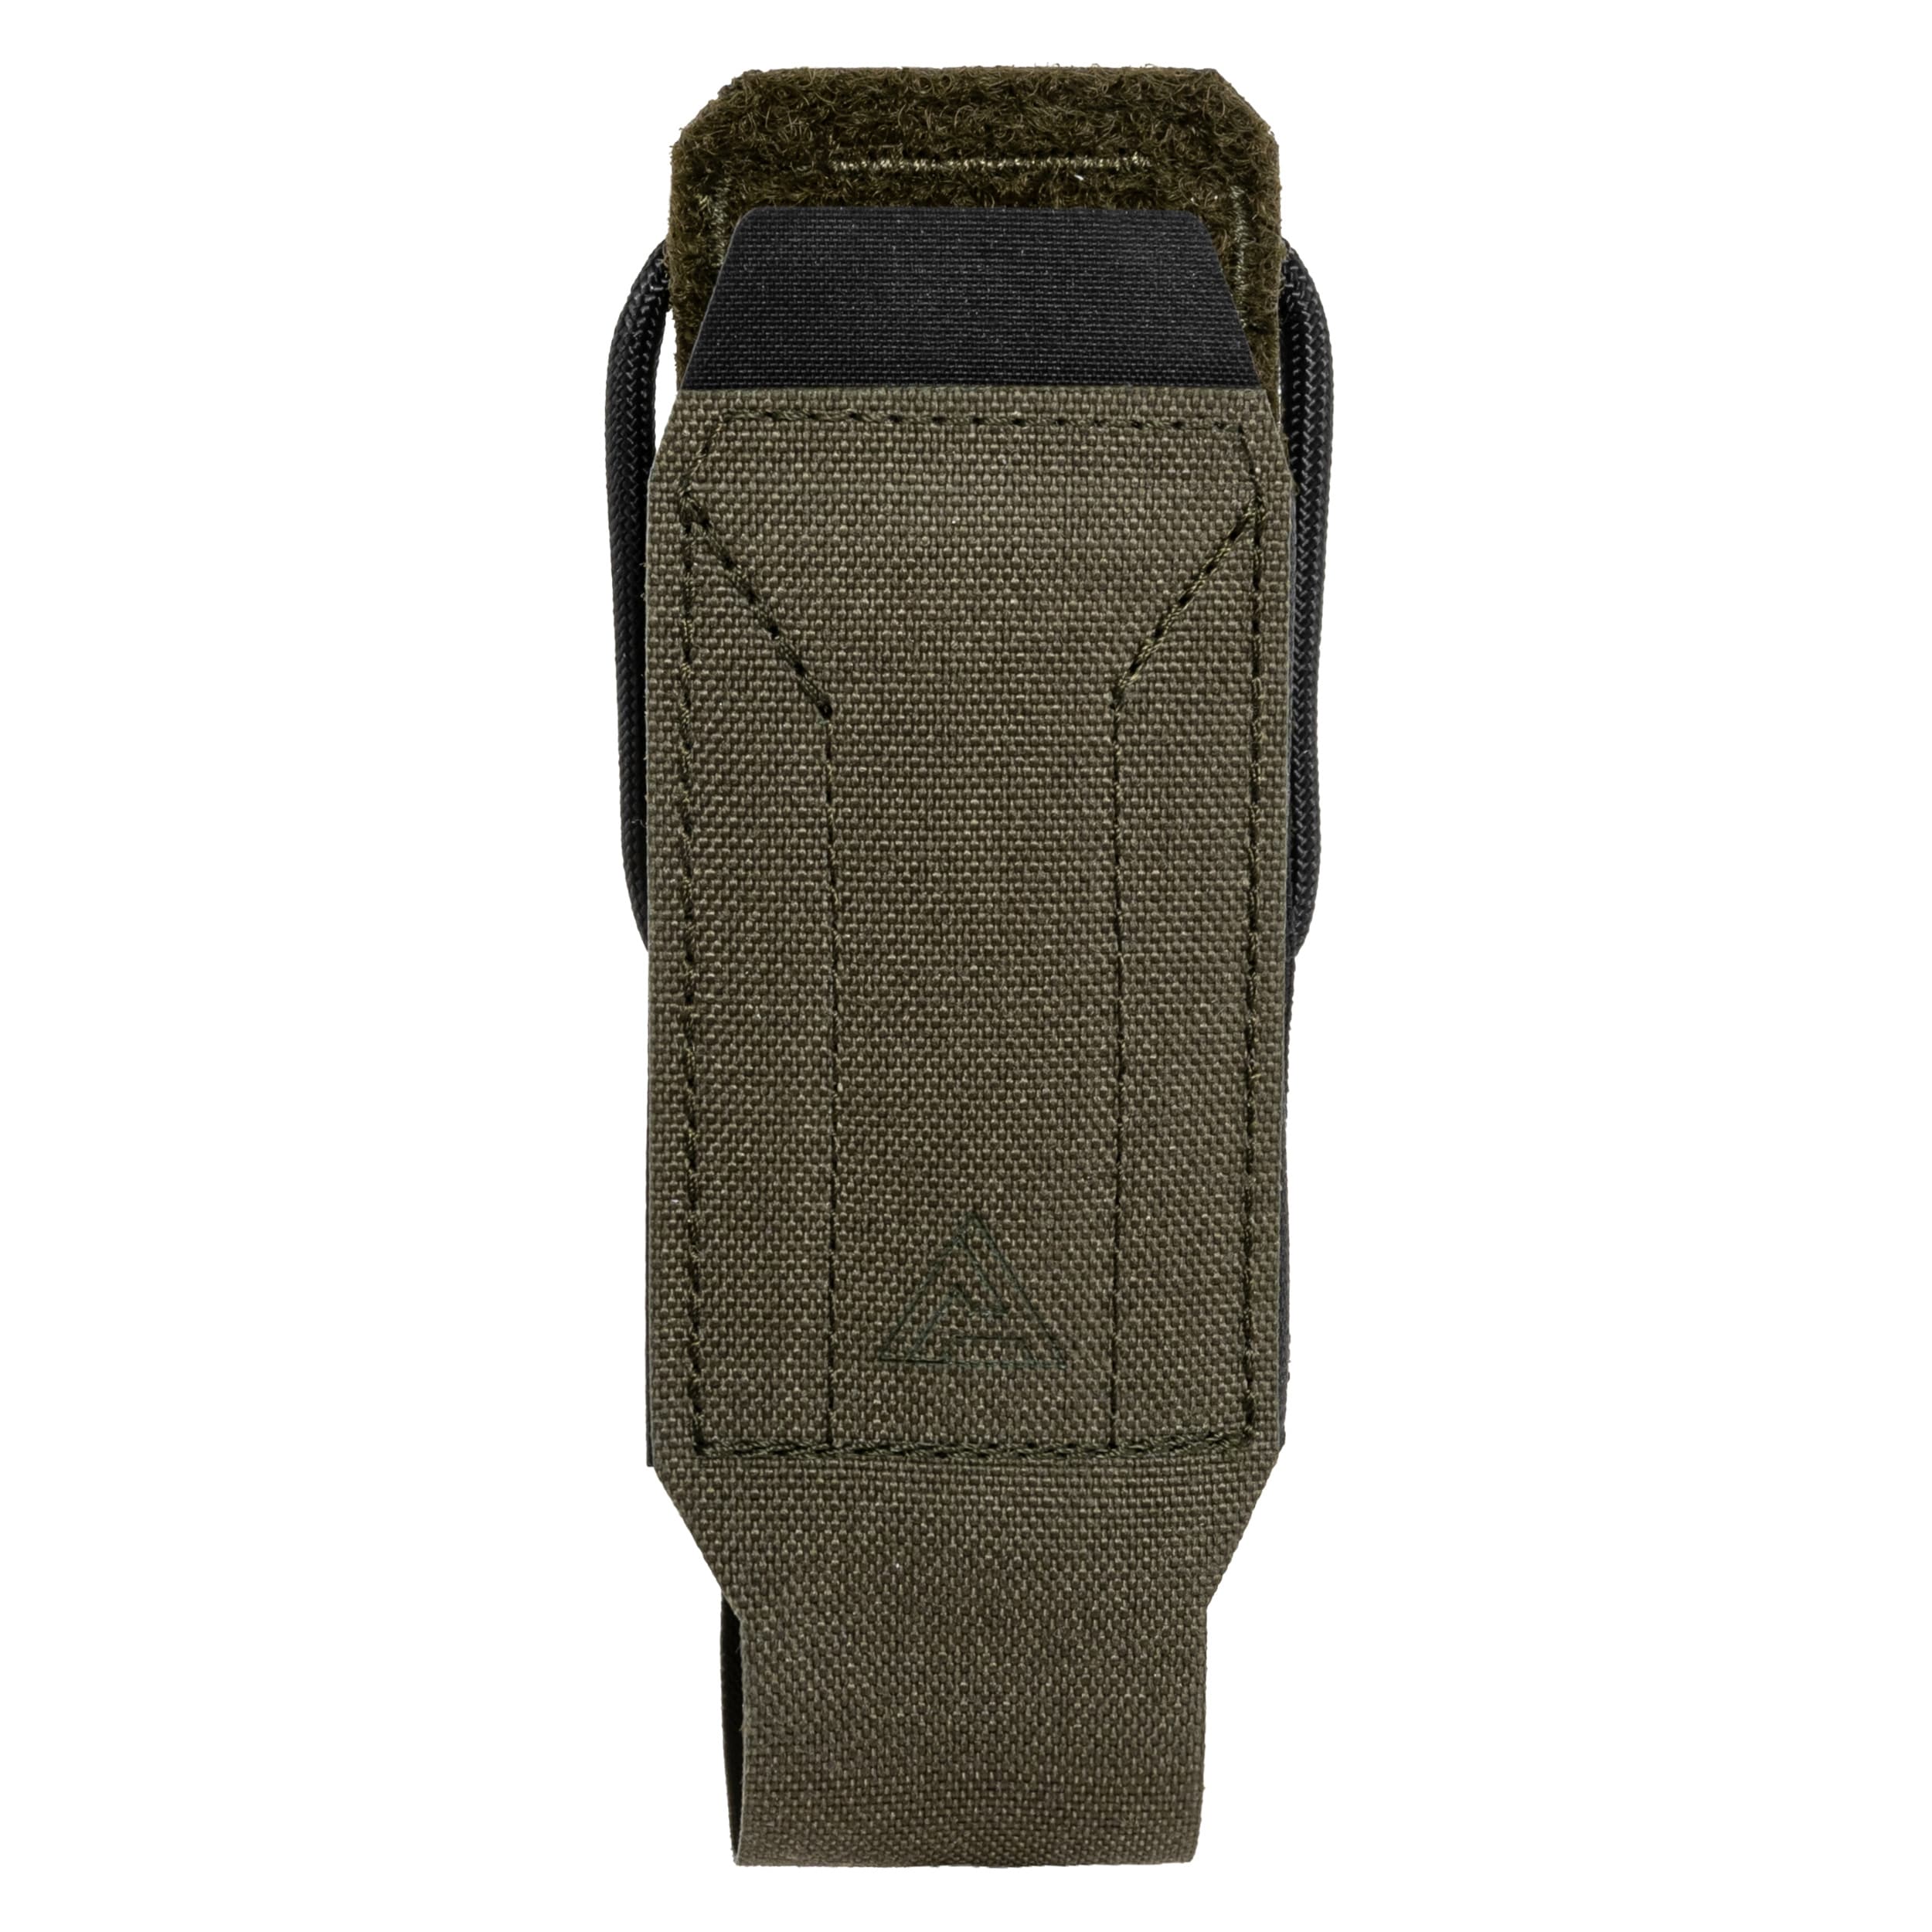 Ładownica Direct Action Flashbang Pouch Open - Ranger Green